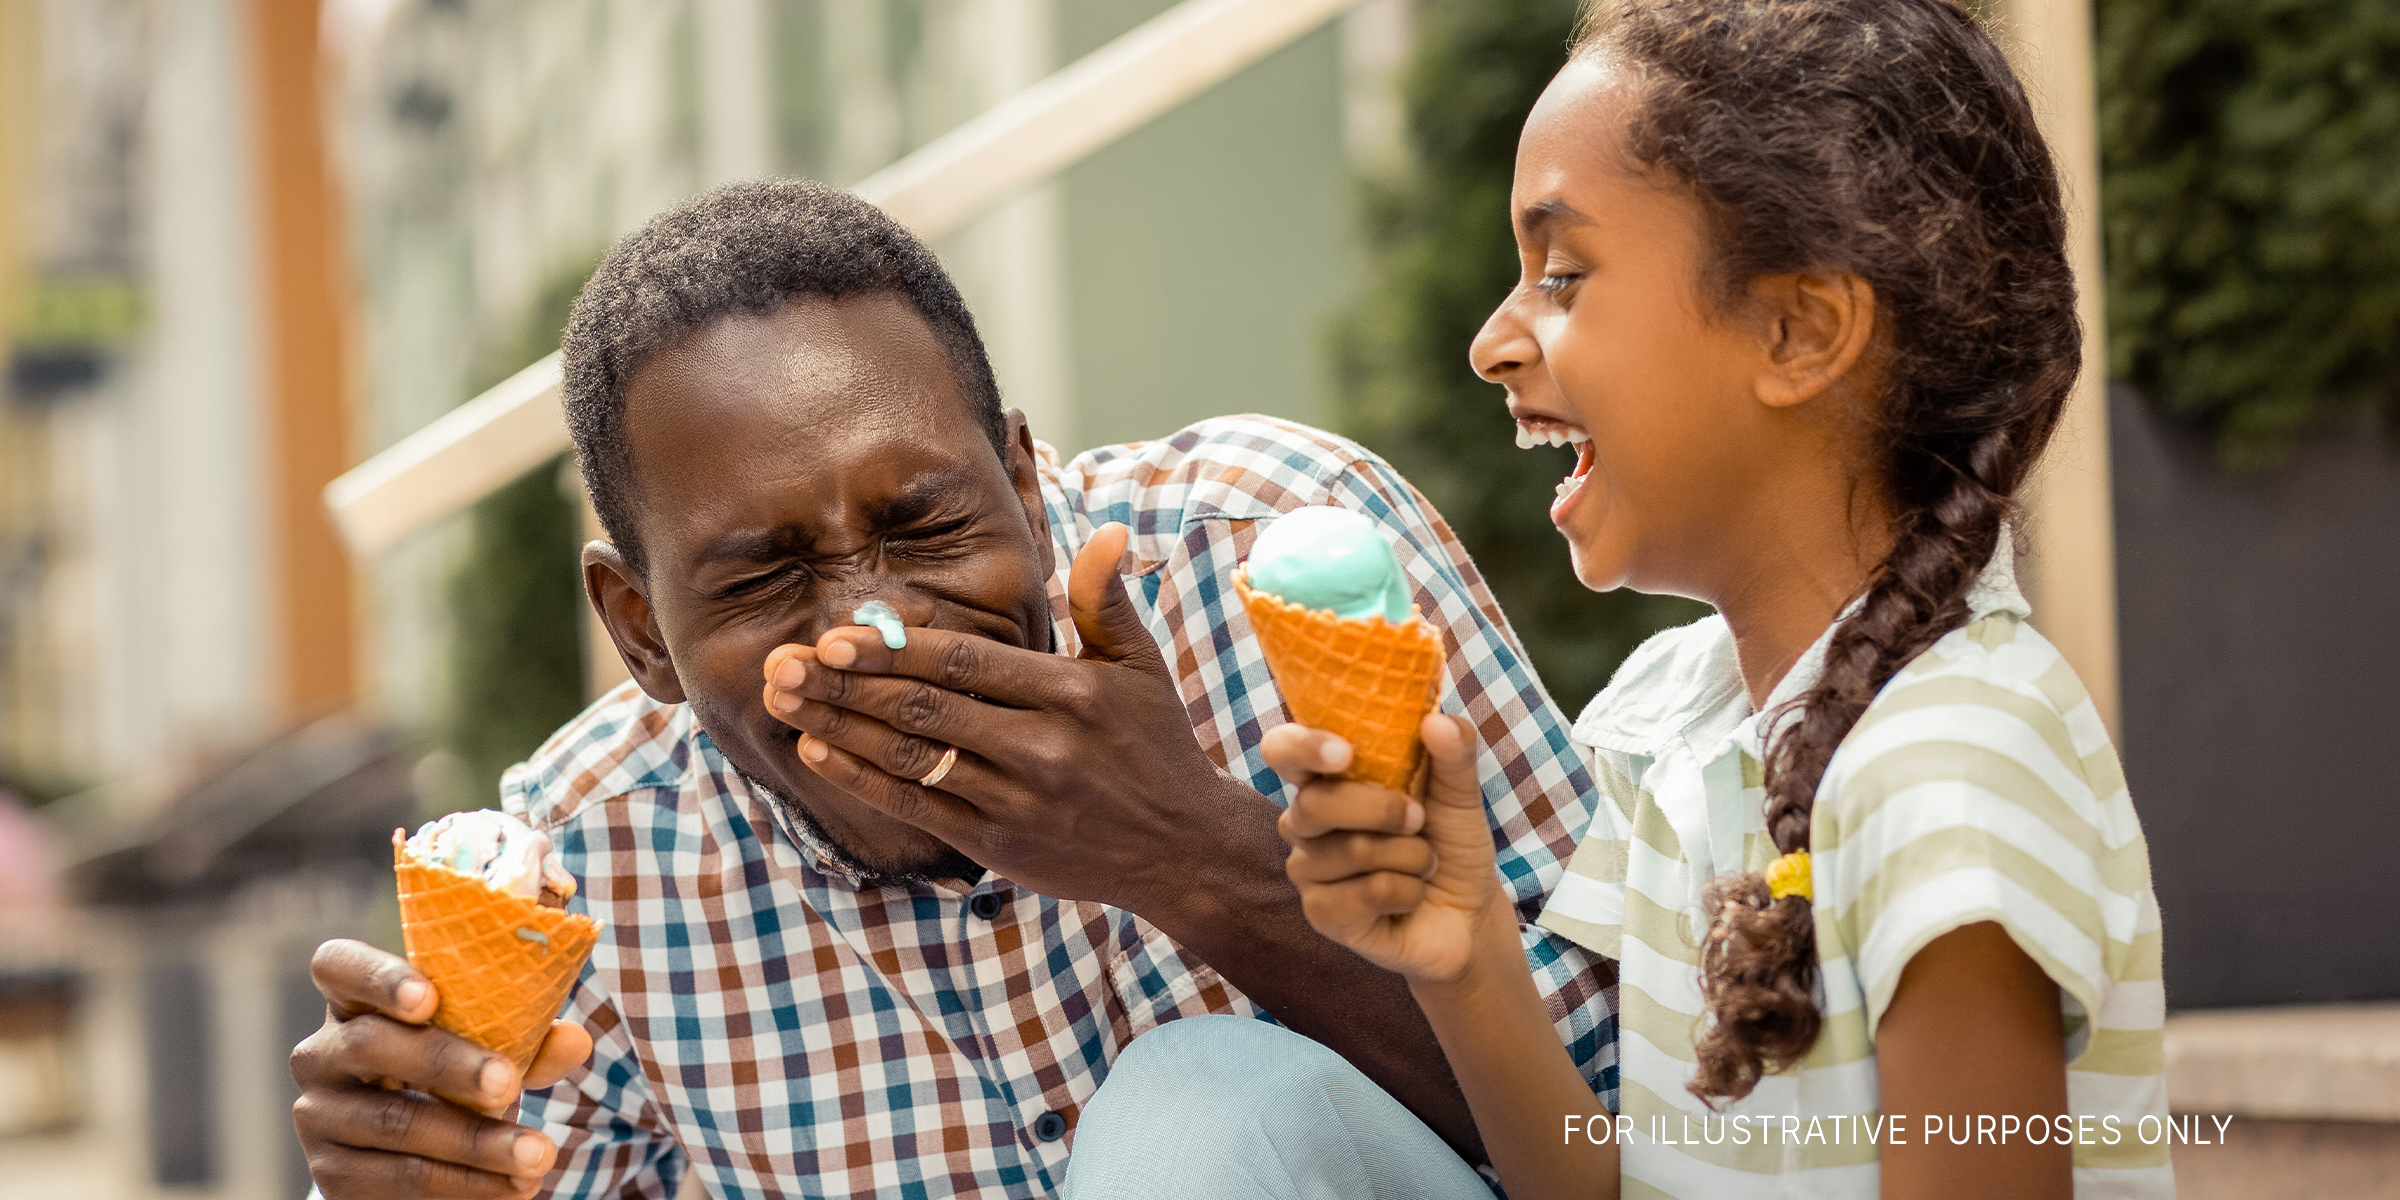 A parent and child eating ice cream and laughing | Source: Getty Images